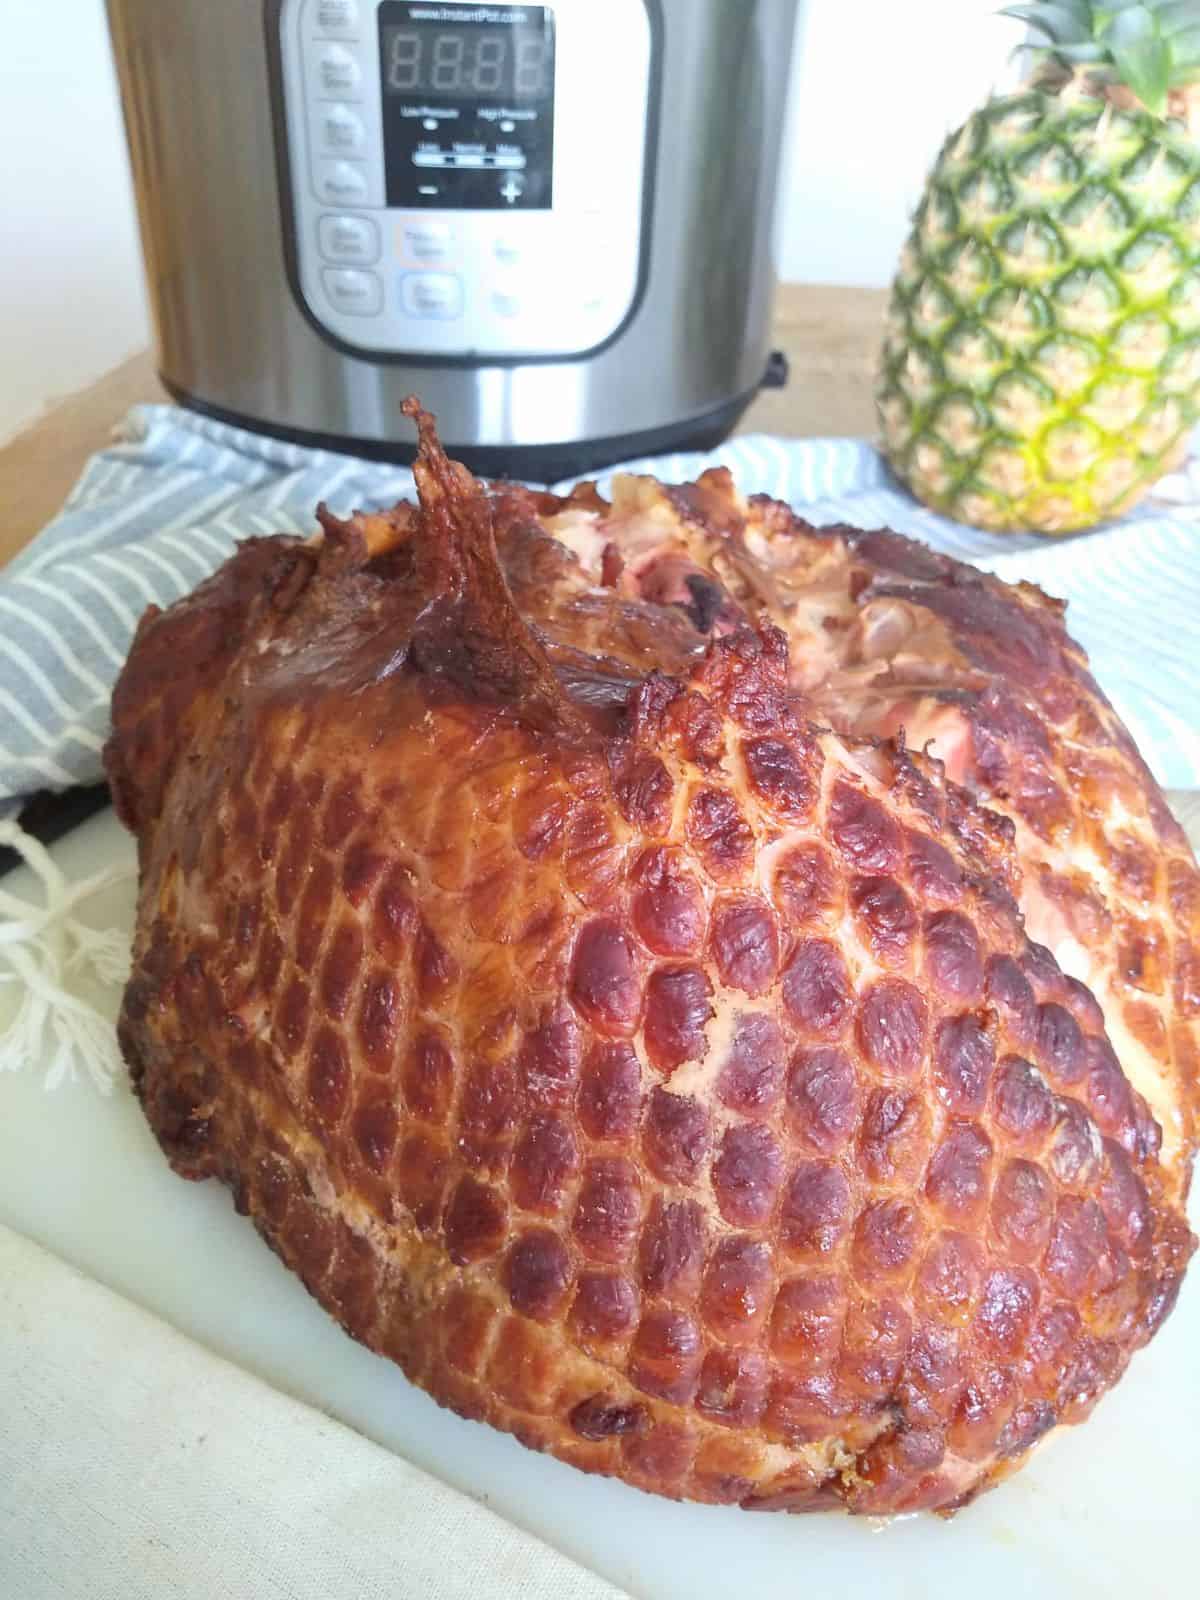 A cooked ham sitting on plastic cutting board with an Instant Pot, a whole pineapple, and a gray ahd white stripped towel in the background.